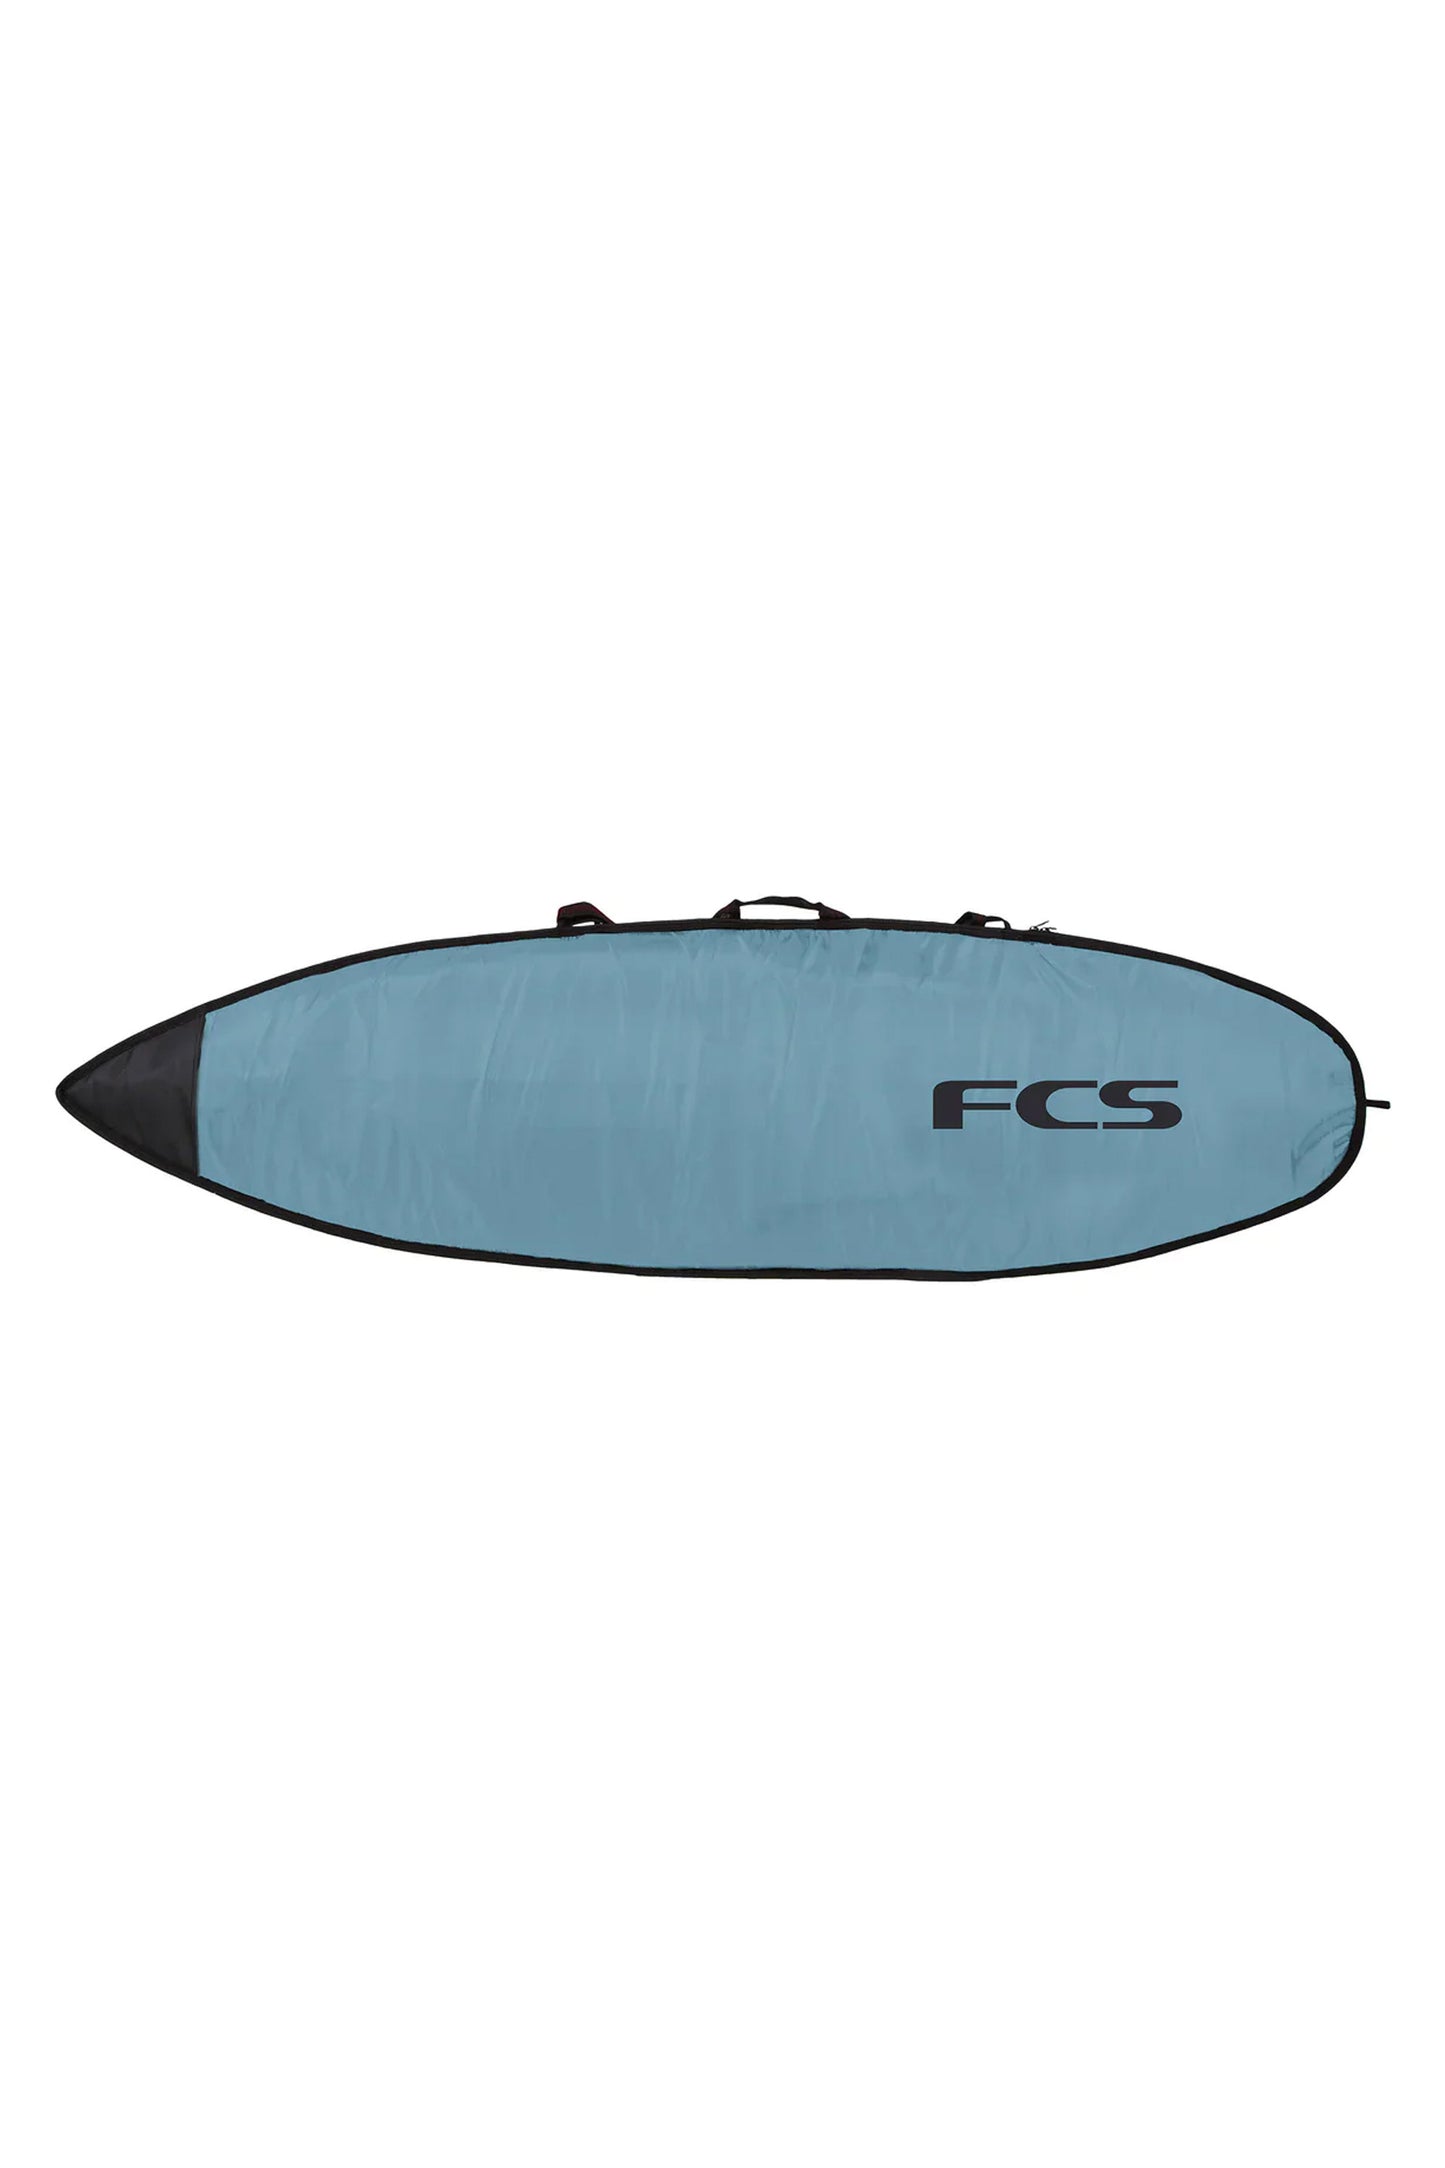 Pukas-Surf-Shop-fcs-classic-all-purpose-cover-board-cover-tranquil-blue